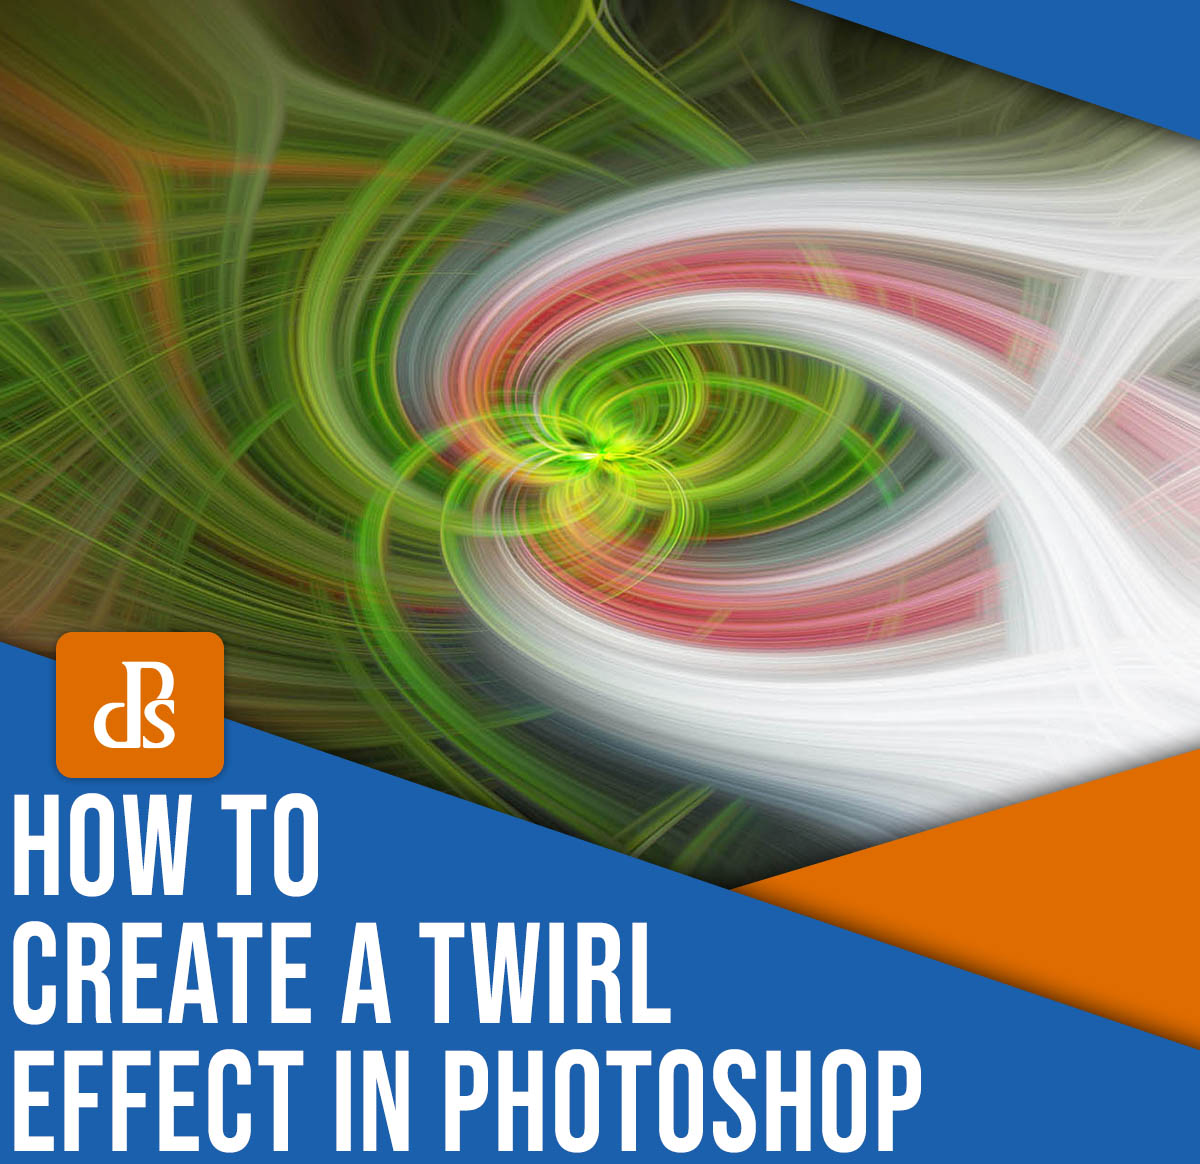 How to create a twirl effect in Photoshop